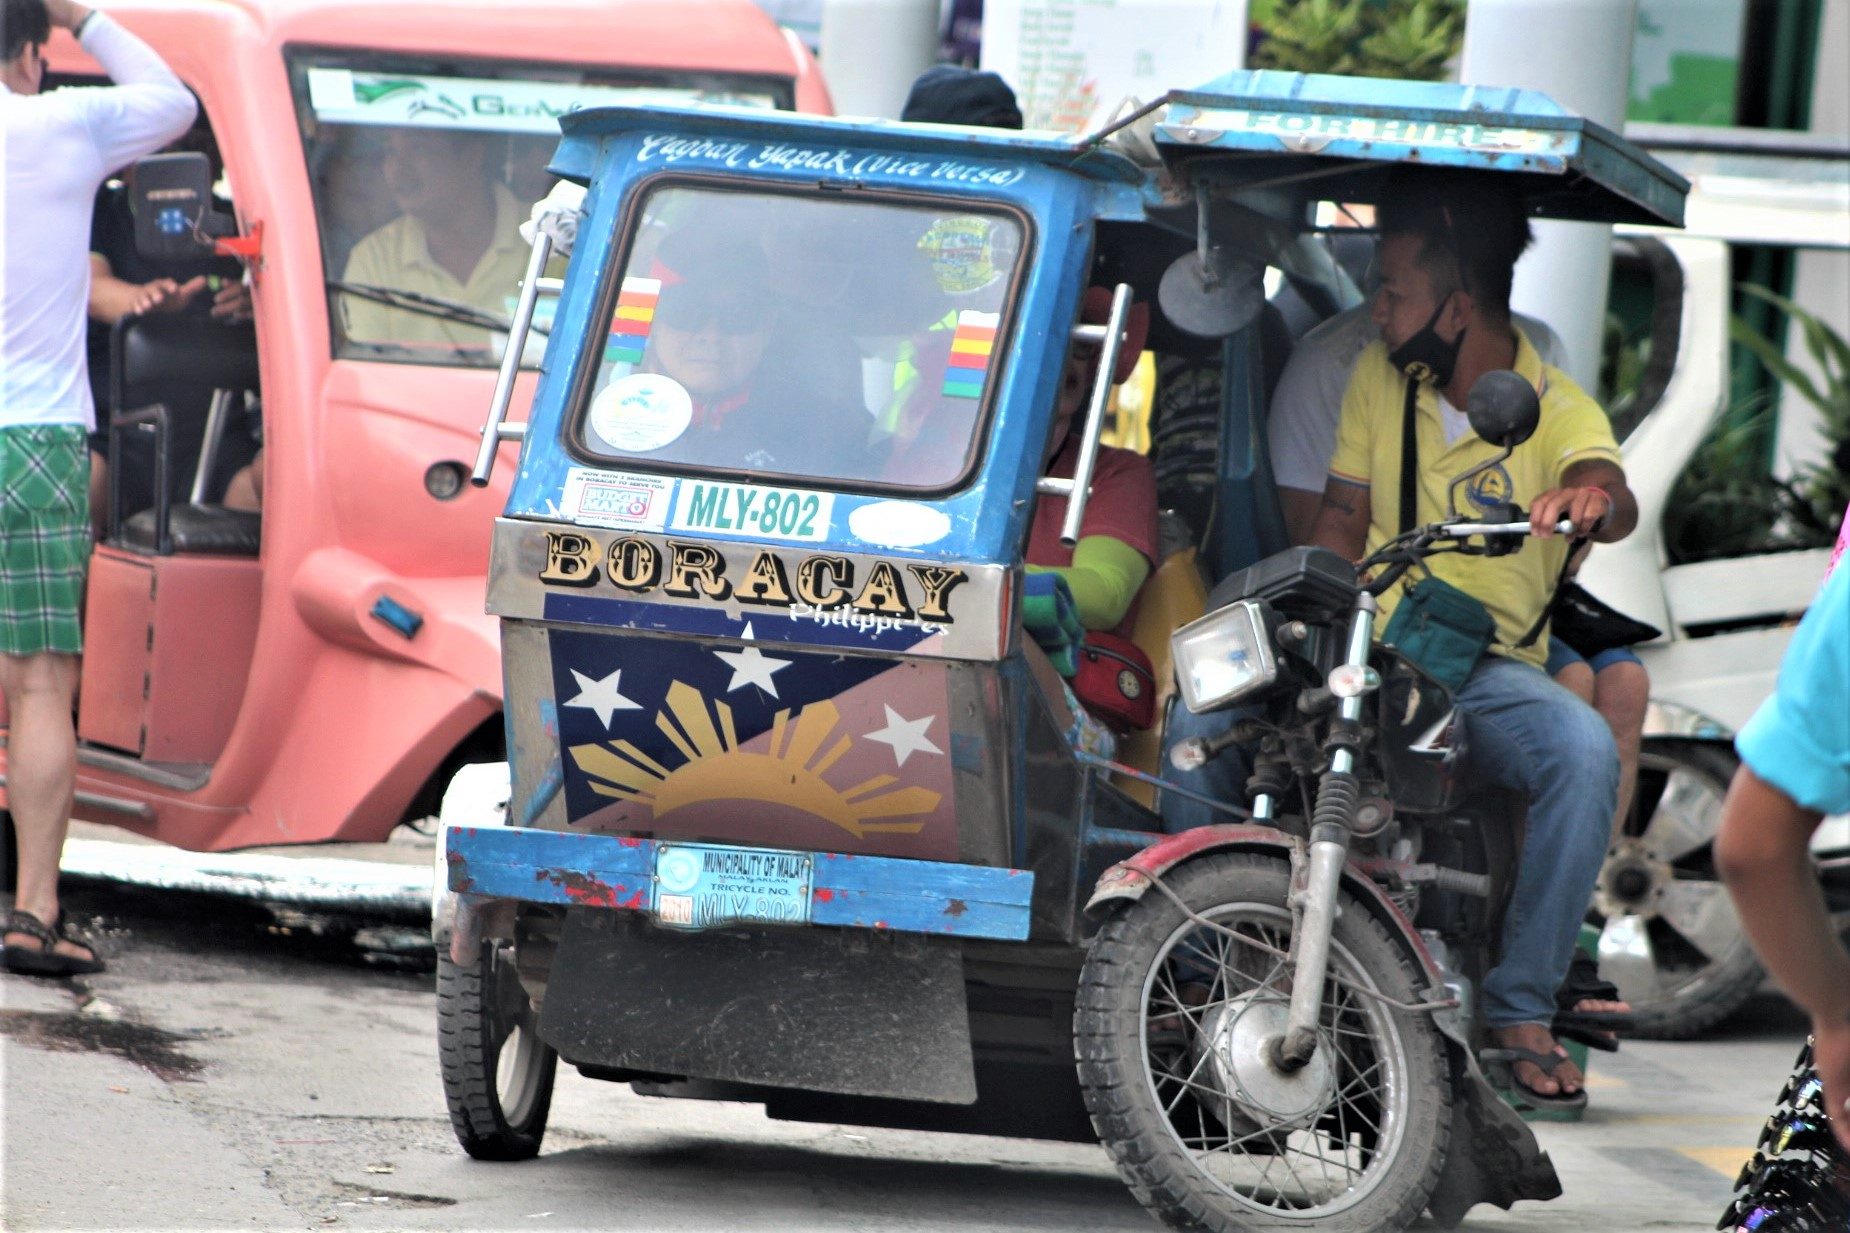 LTO Western Visayas wants 1,800 ‘unregistered’ vehicles out of Boracay